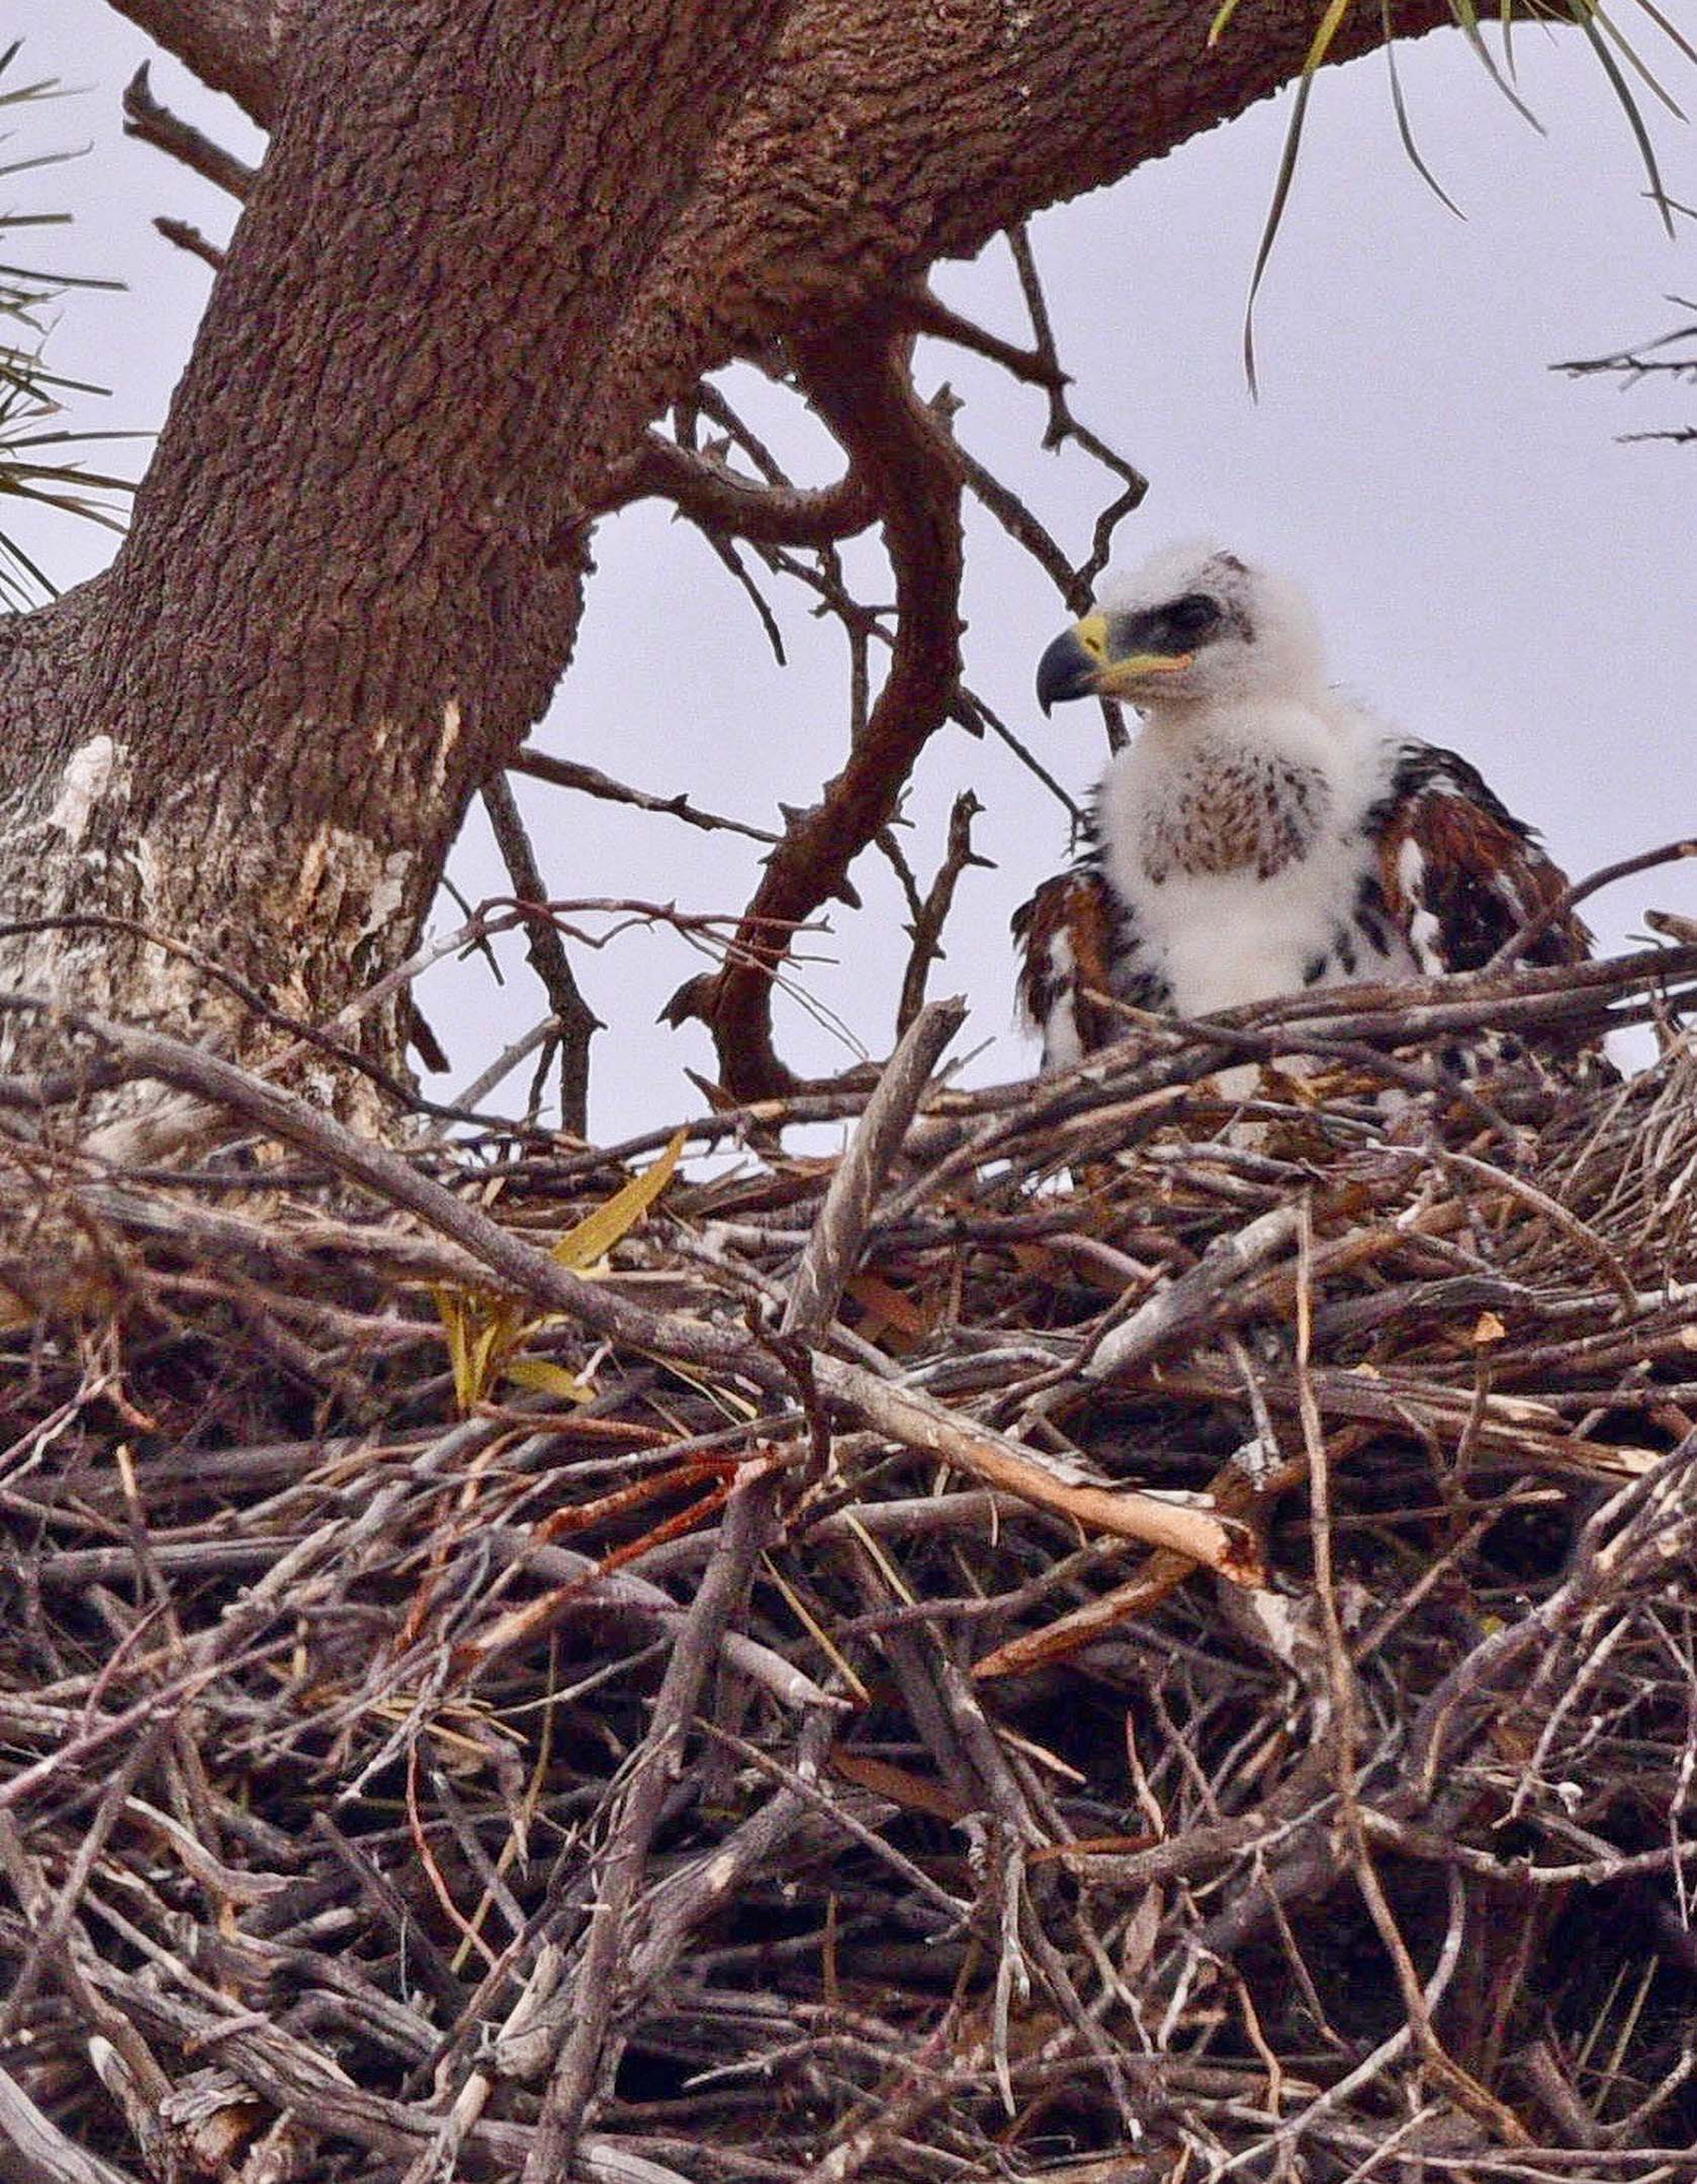 37eb301f/4x4 australia explore cooper creek sa ttc039 this young eagle chick was spotted in a tree close to the track jpg